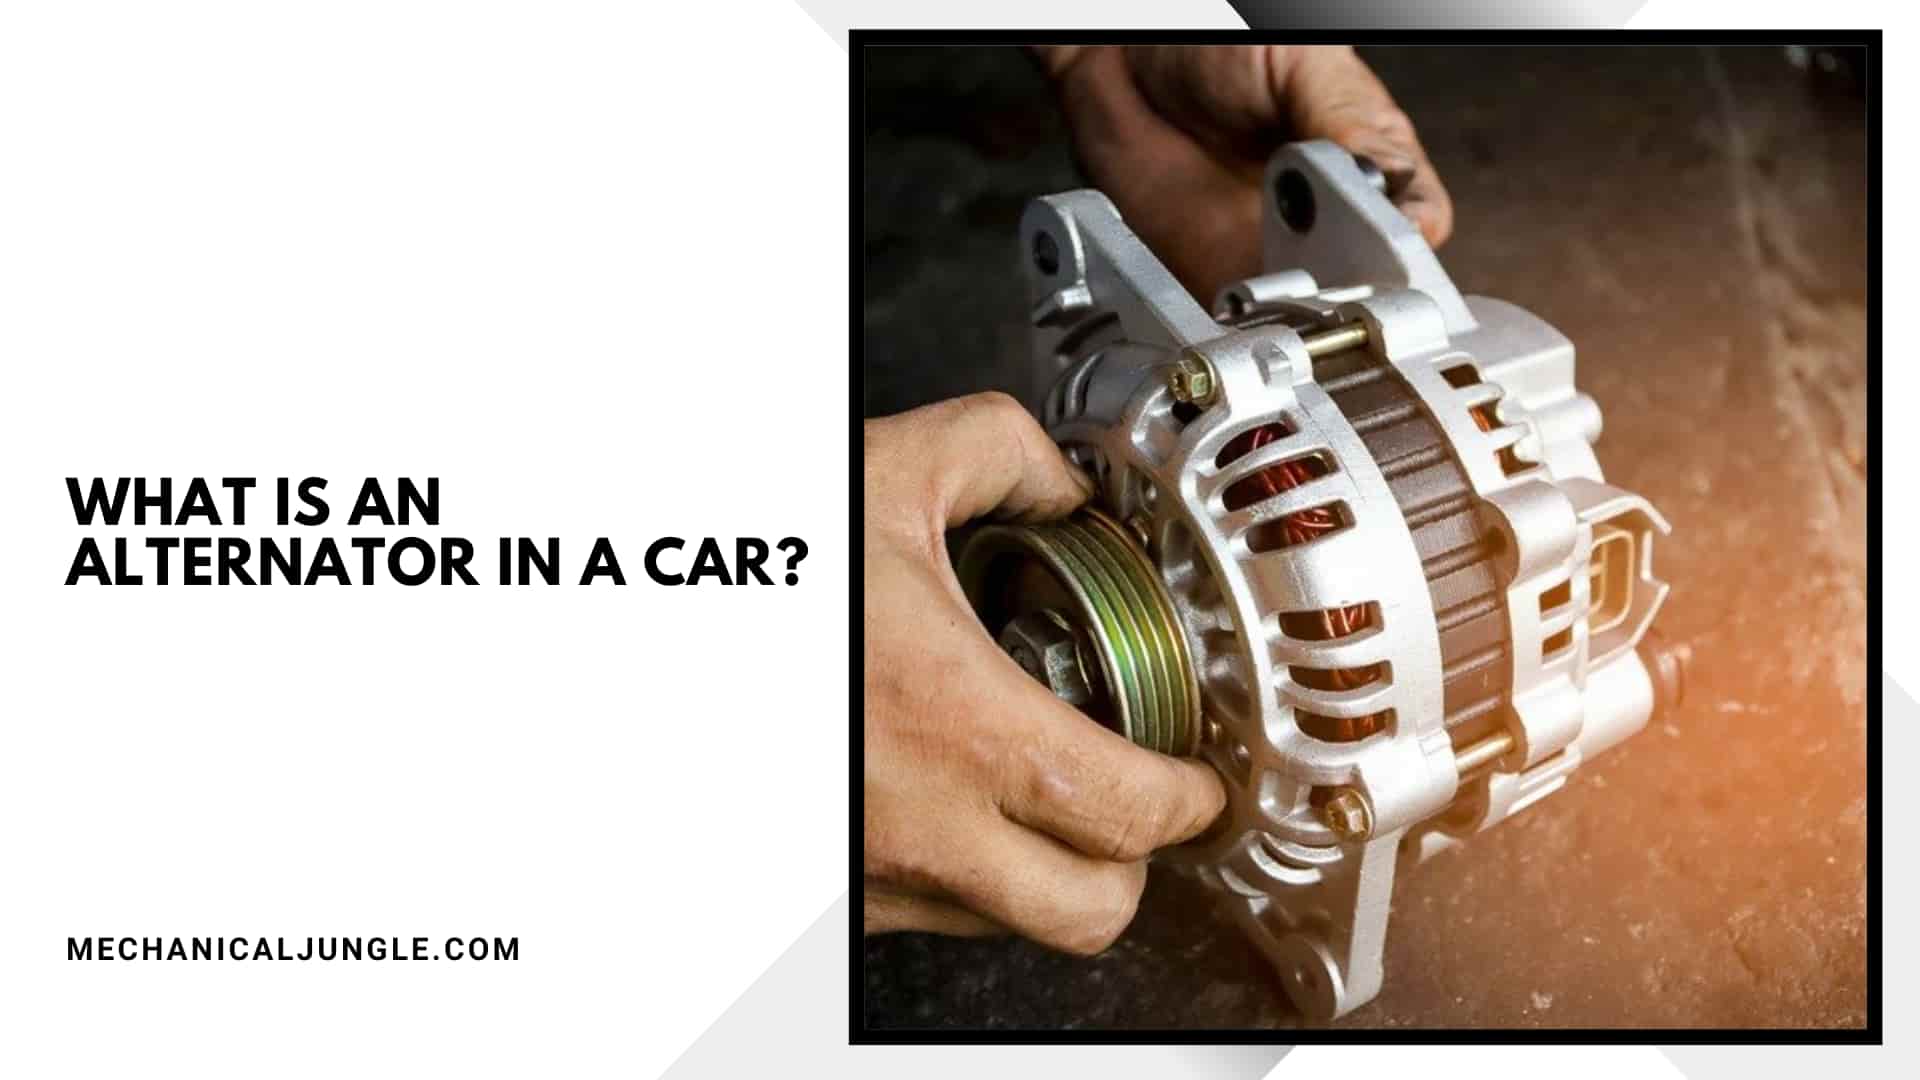 What Is an Alternator in a Car?